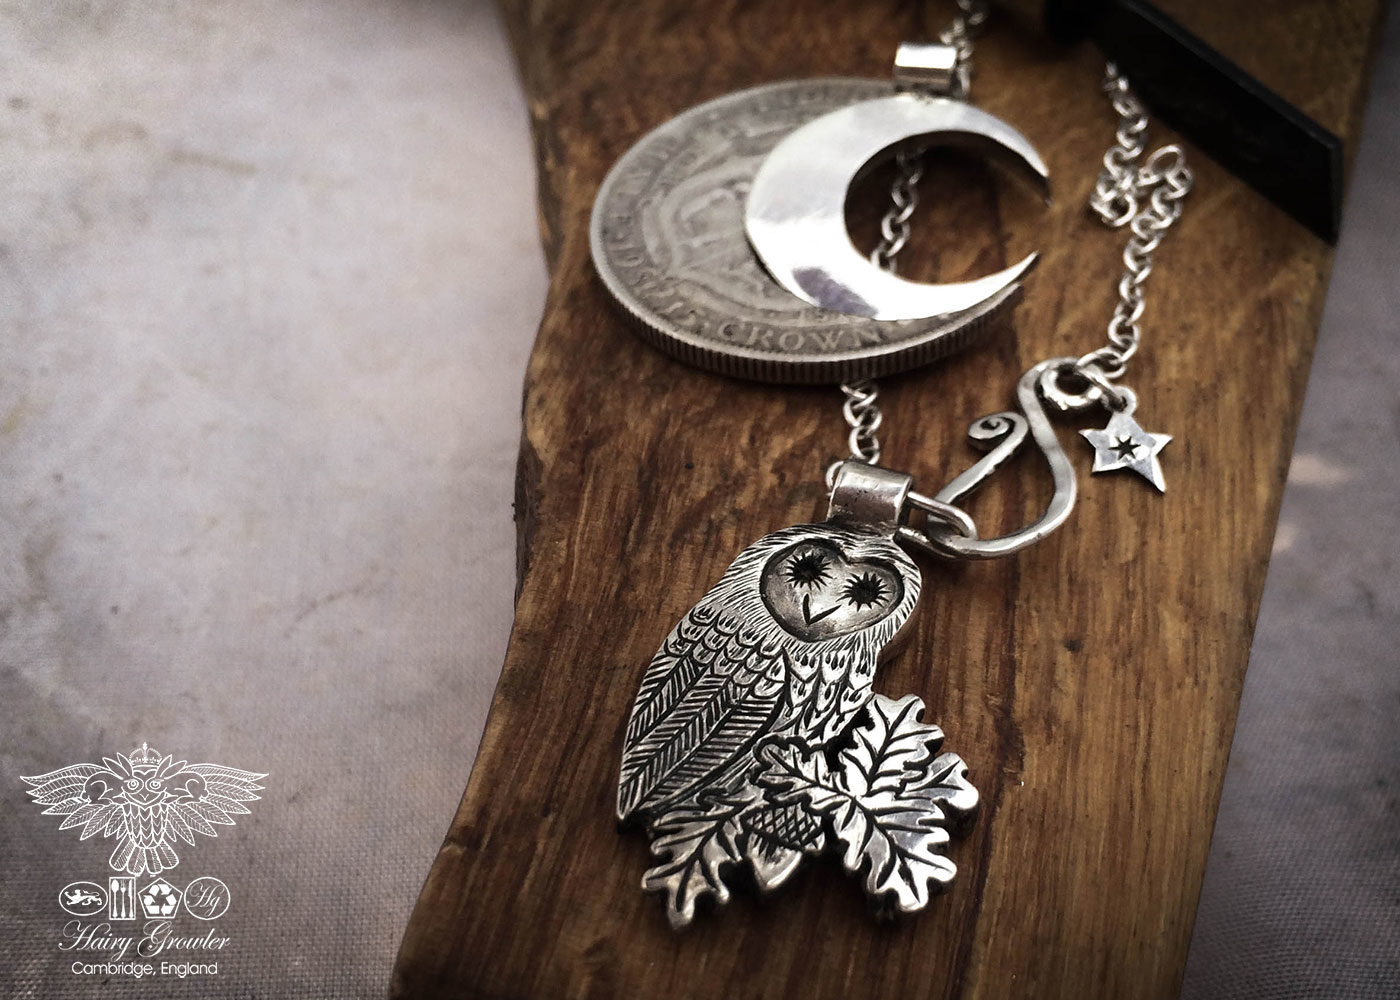 handmade and recycled silver coins wise barn owl charm for a tree sculpture or necklace